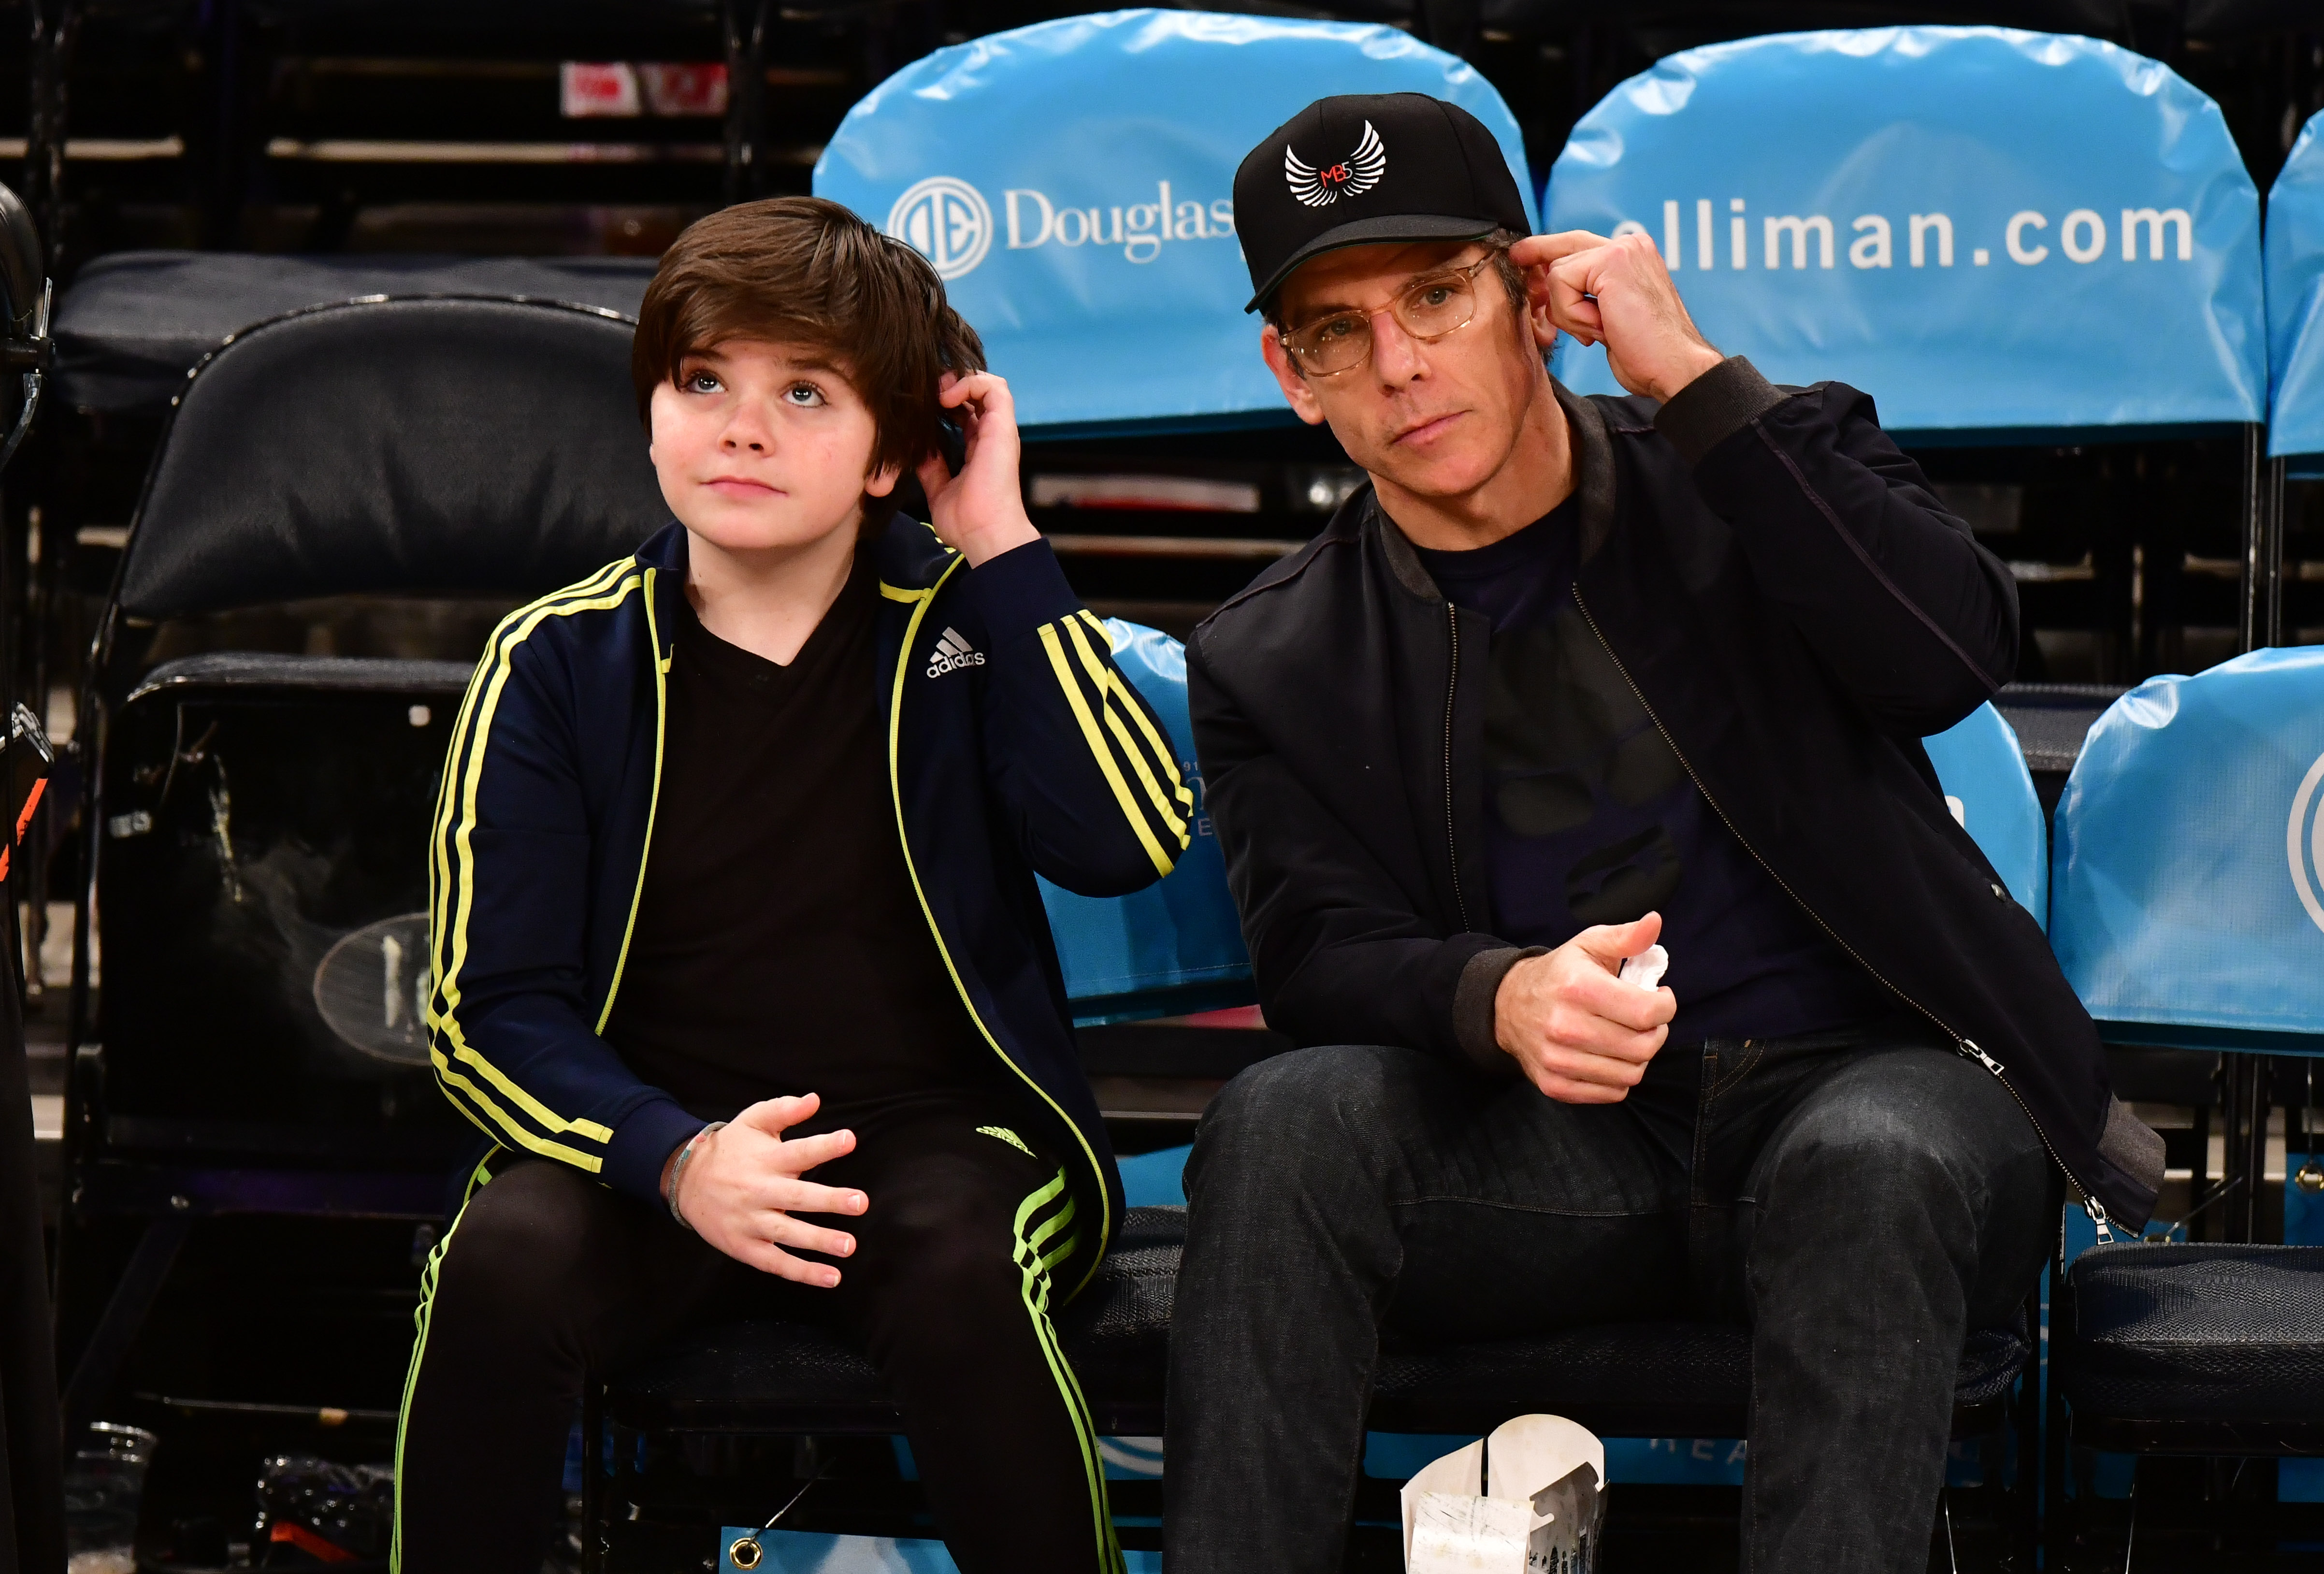 Quinlin and Ben Stiller at a Brooklyn Nets Vs New York Knicks game in New York City on October 29, 2018 | Source: Getty Images